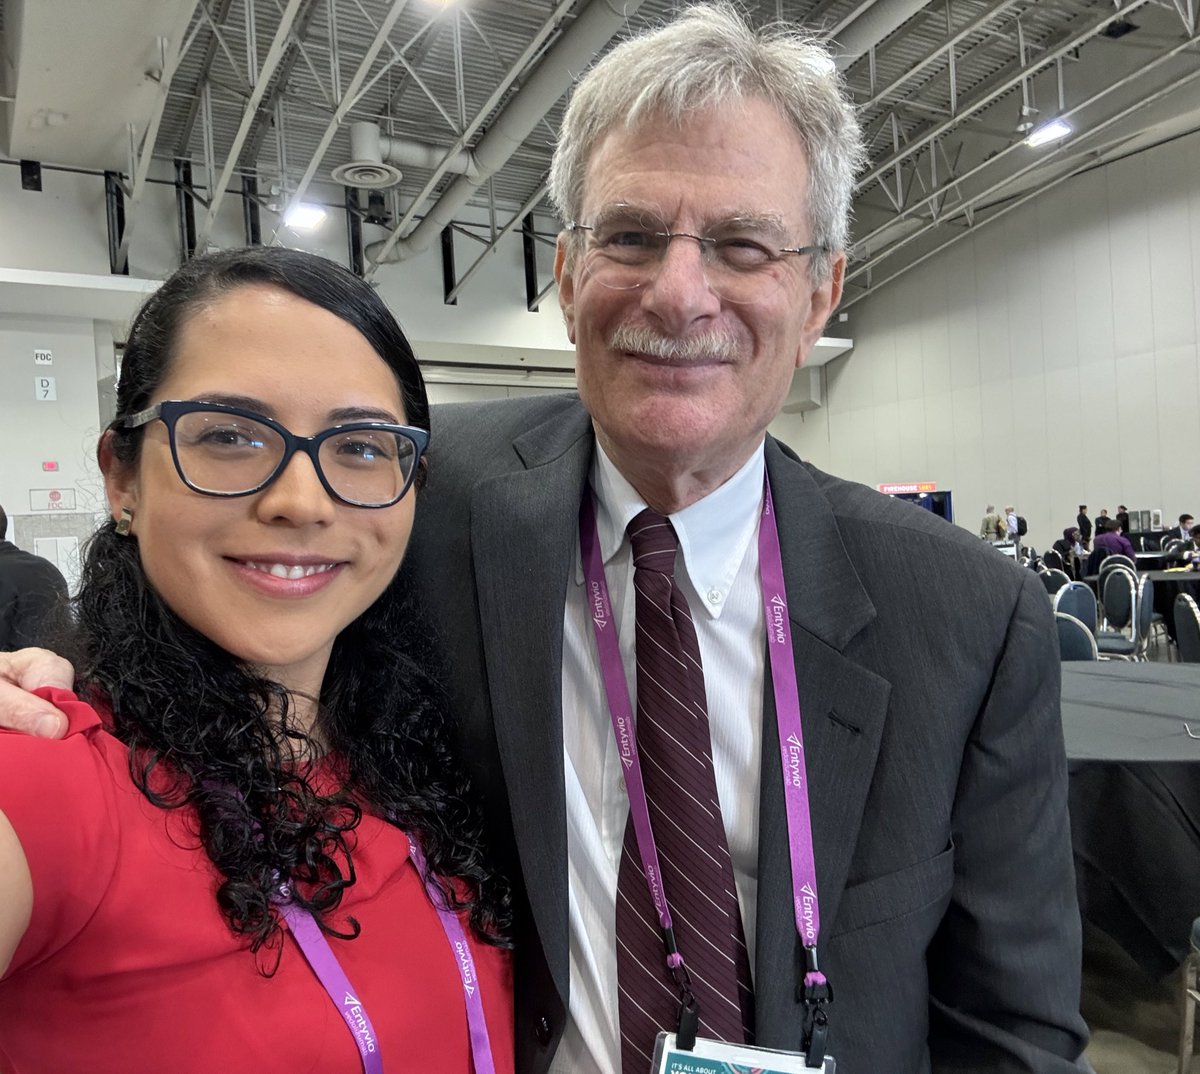 Thrilled to share this highlight from #DDW2024 - a moment catching up with the incredible Dr. David Katzka. Grateful for his mentorship and honored to witness him receive the well-deserved AGA Distinguished Educator Award! 🌟 #Inspiration #AGAAwards @DDWMeeting